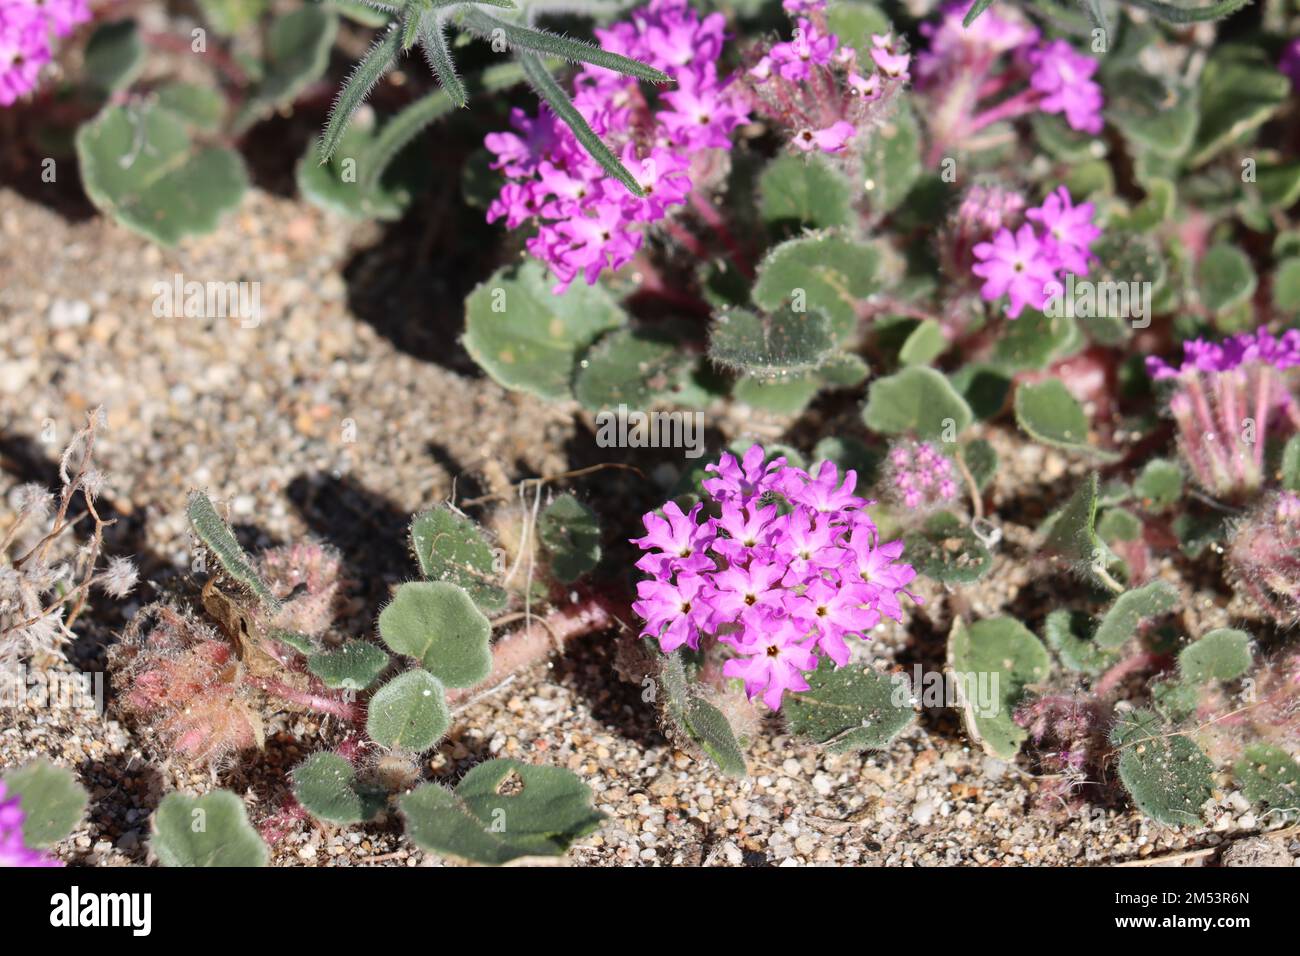 Pink flowering racemose capitate cluster inflorescences of Abronia Villosa, Nyctaginaceae, native annual herb in the Borrego Valley Desert, Autumn. Stock Photo